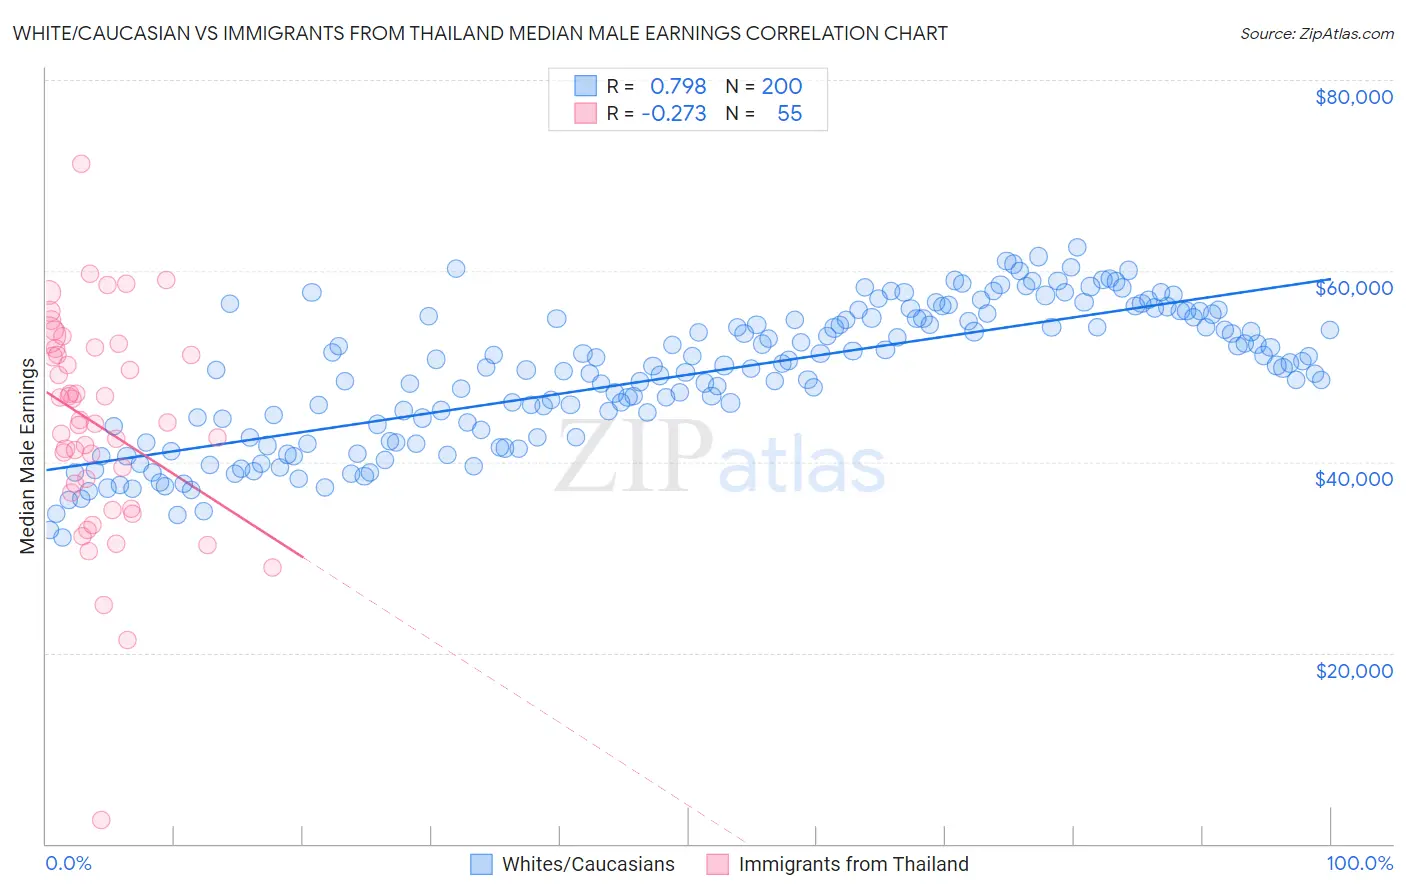 White/Caucasian vs Immigrants from Thailand Median Male Earnings